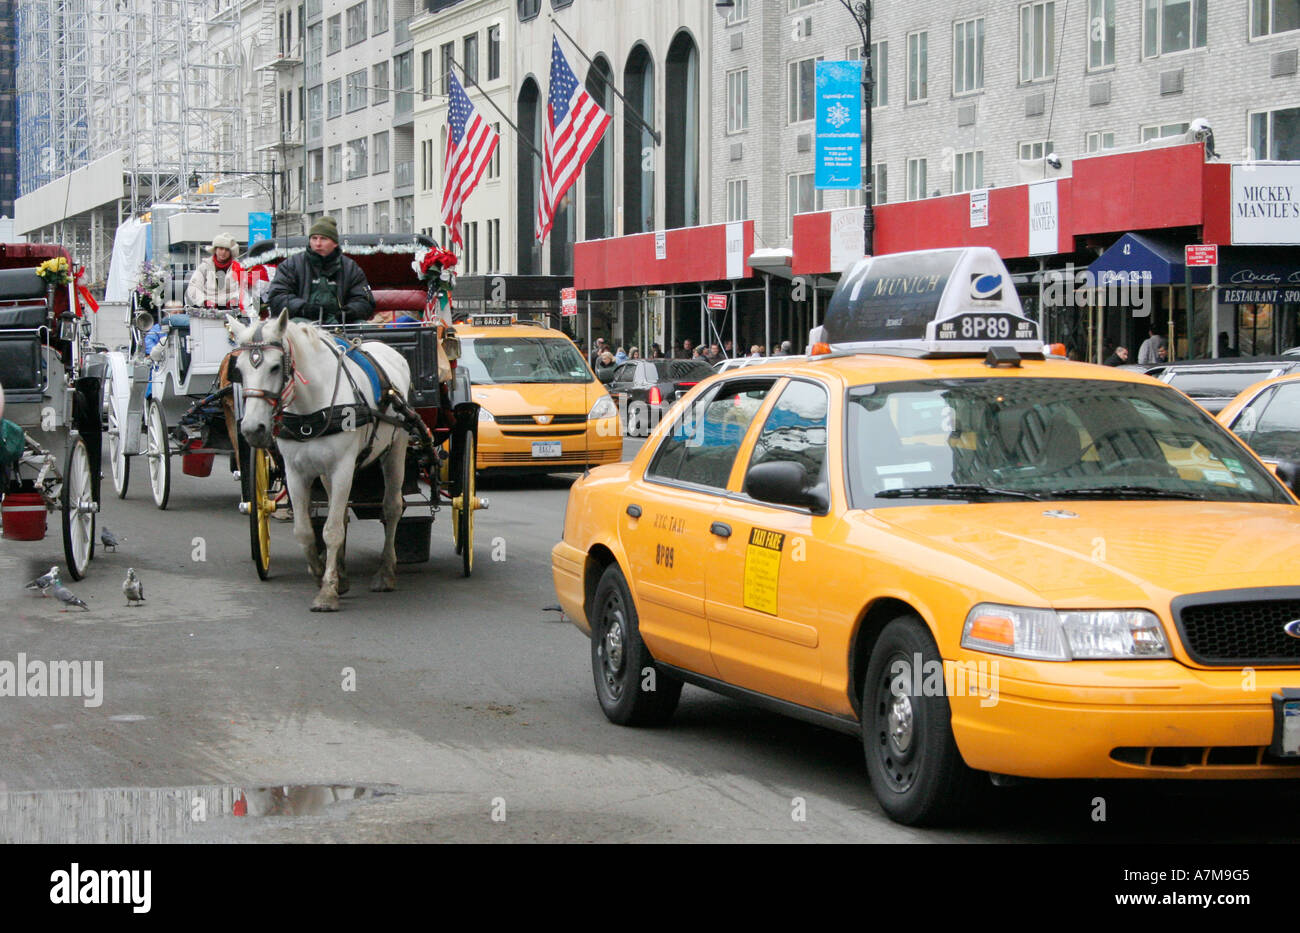 Horse and carriage.  Buggy. Yellow taxi cabs. New York city. USA. Winter. Stock Photo